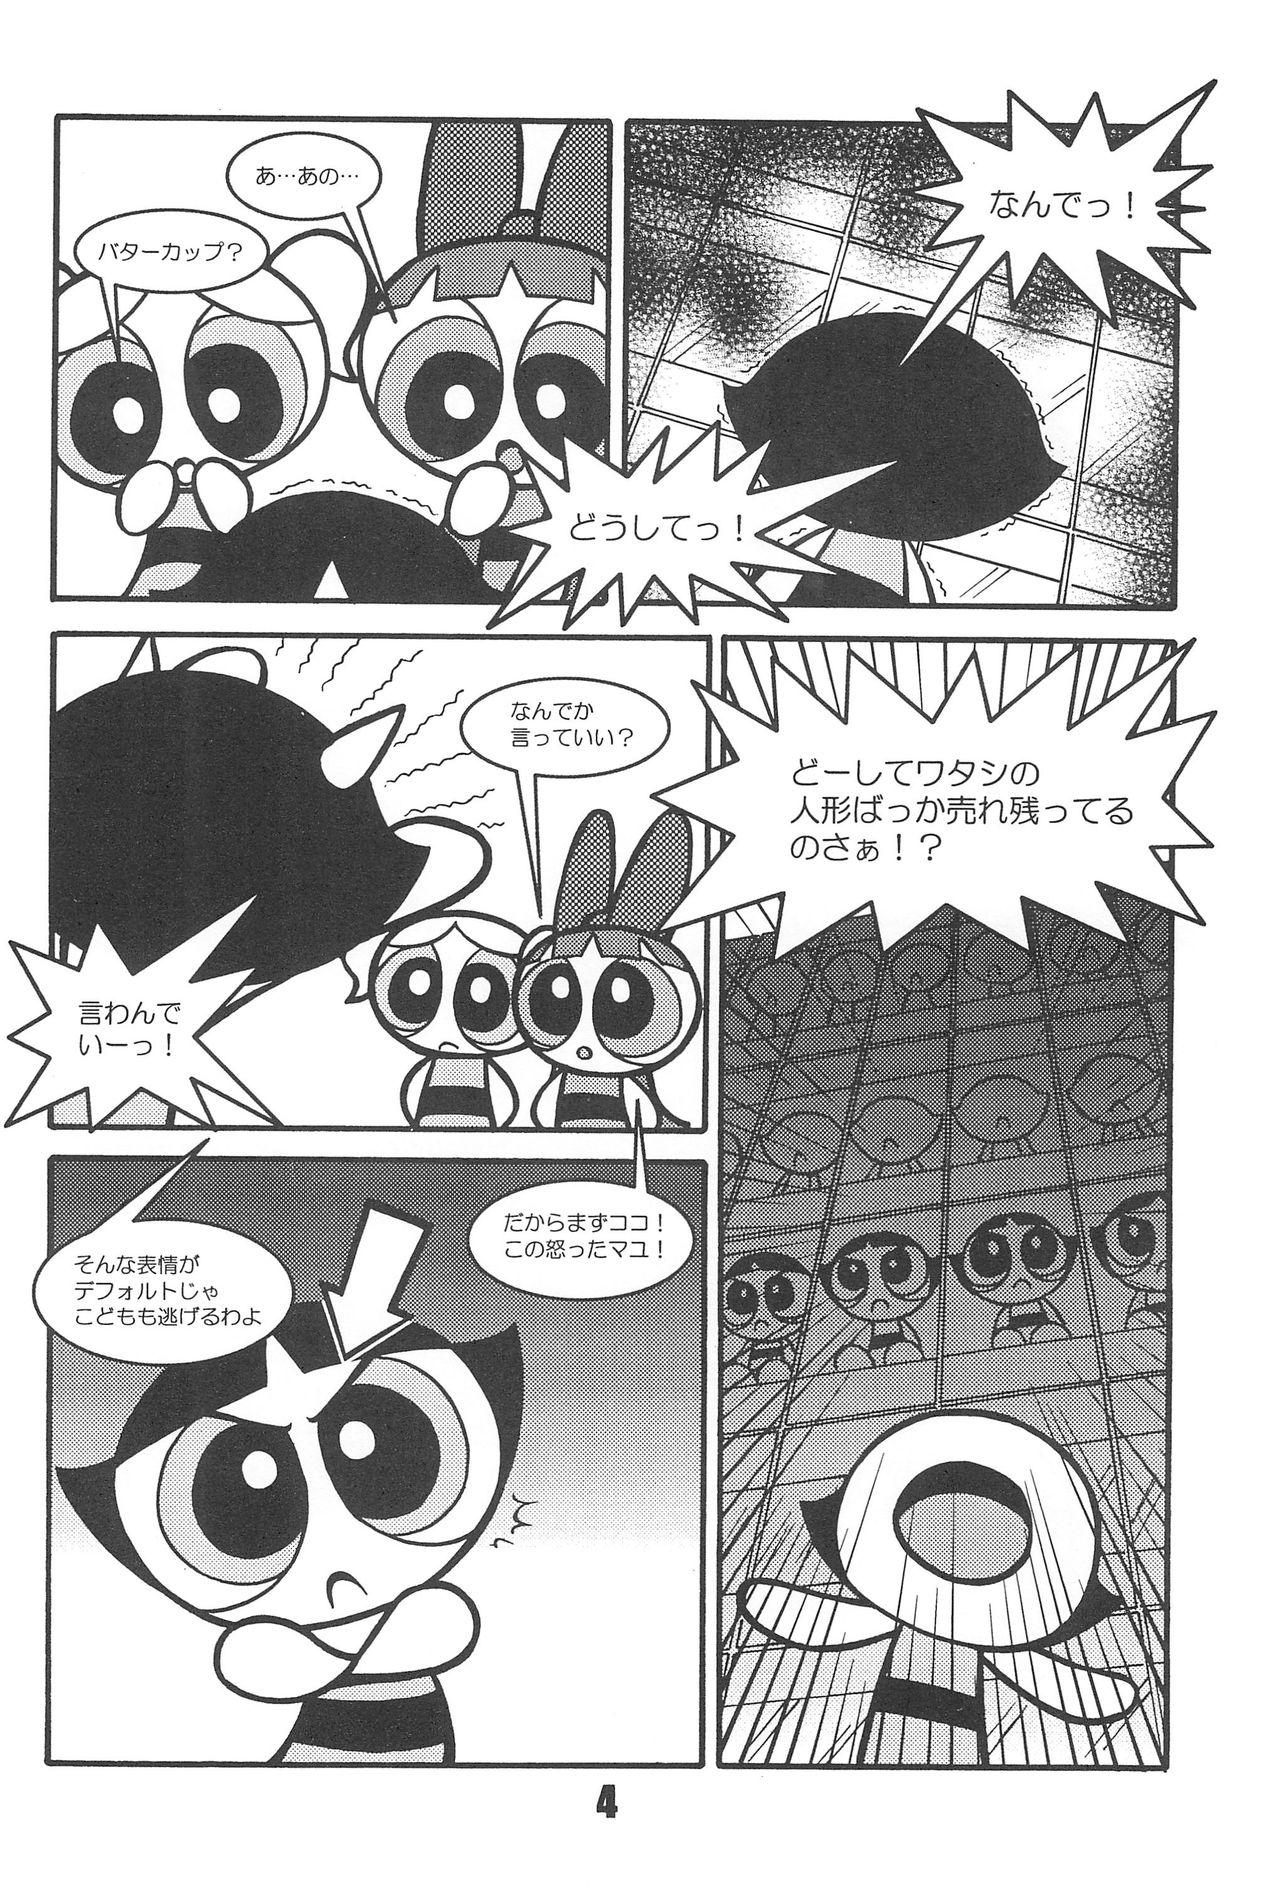 Assfucked Show Goes On! Funhouse 22th - The powerpuff girls Ruiva - Page 4